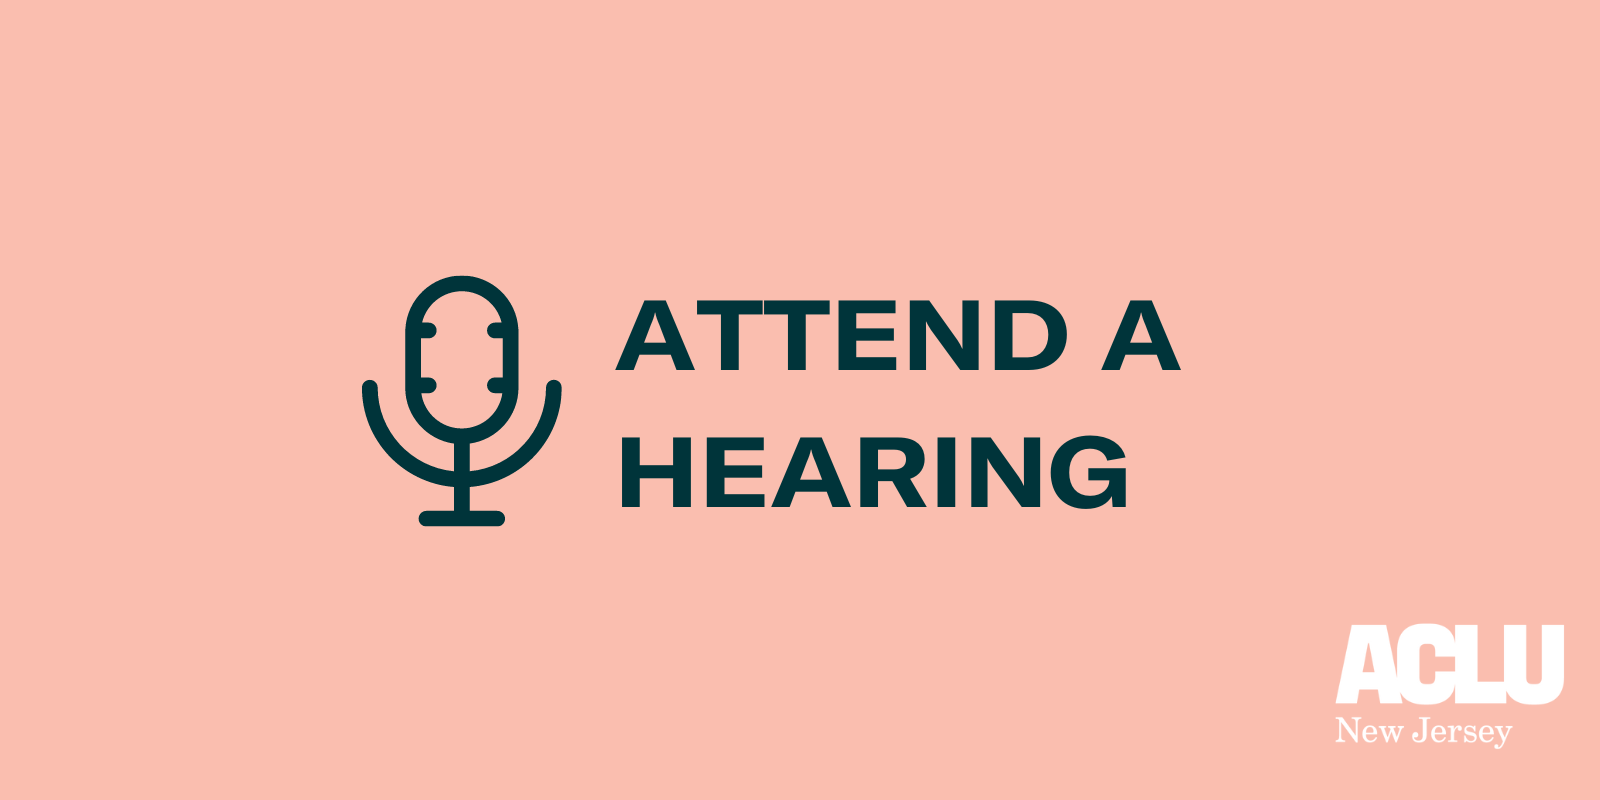 A pink background with an illustration of a microphone and text reading "attend a hearing" in the middle of the graphic